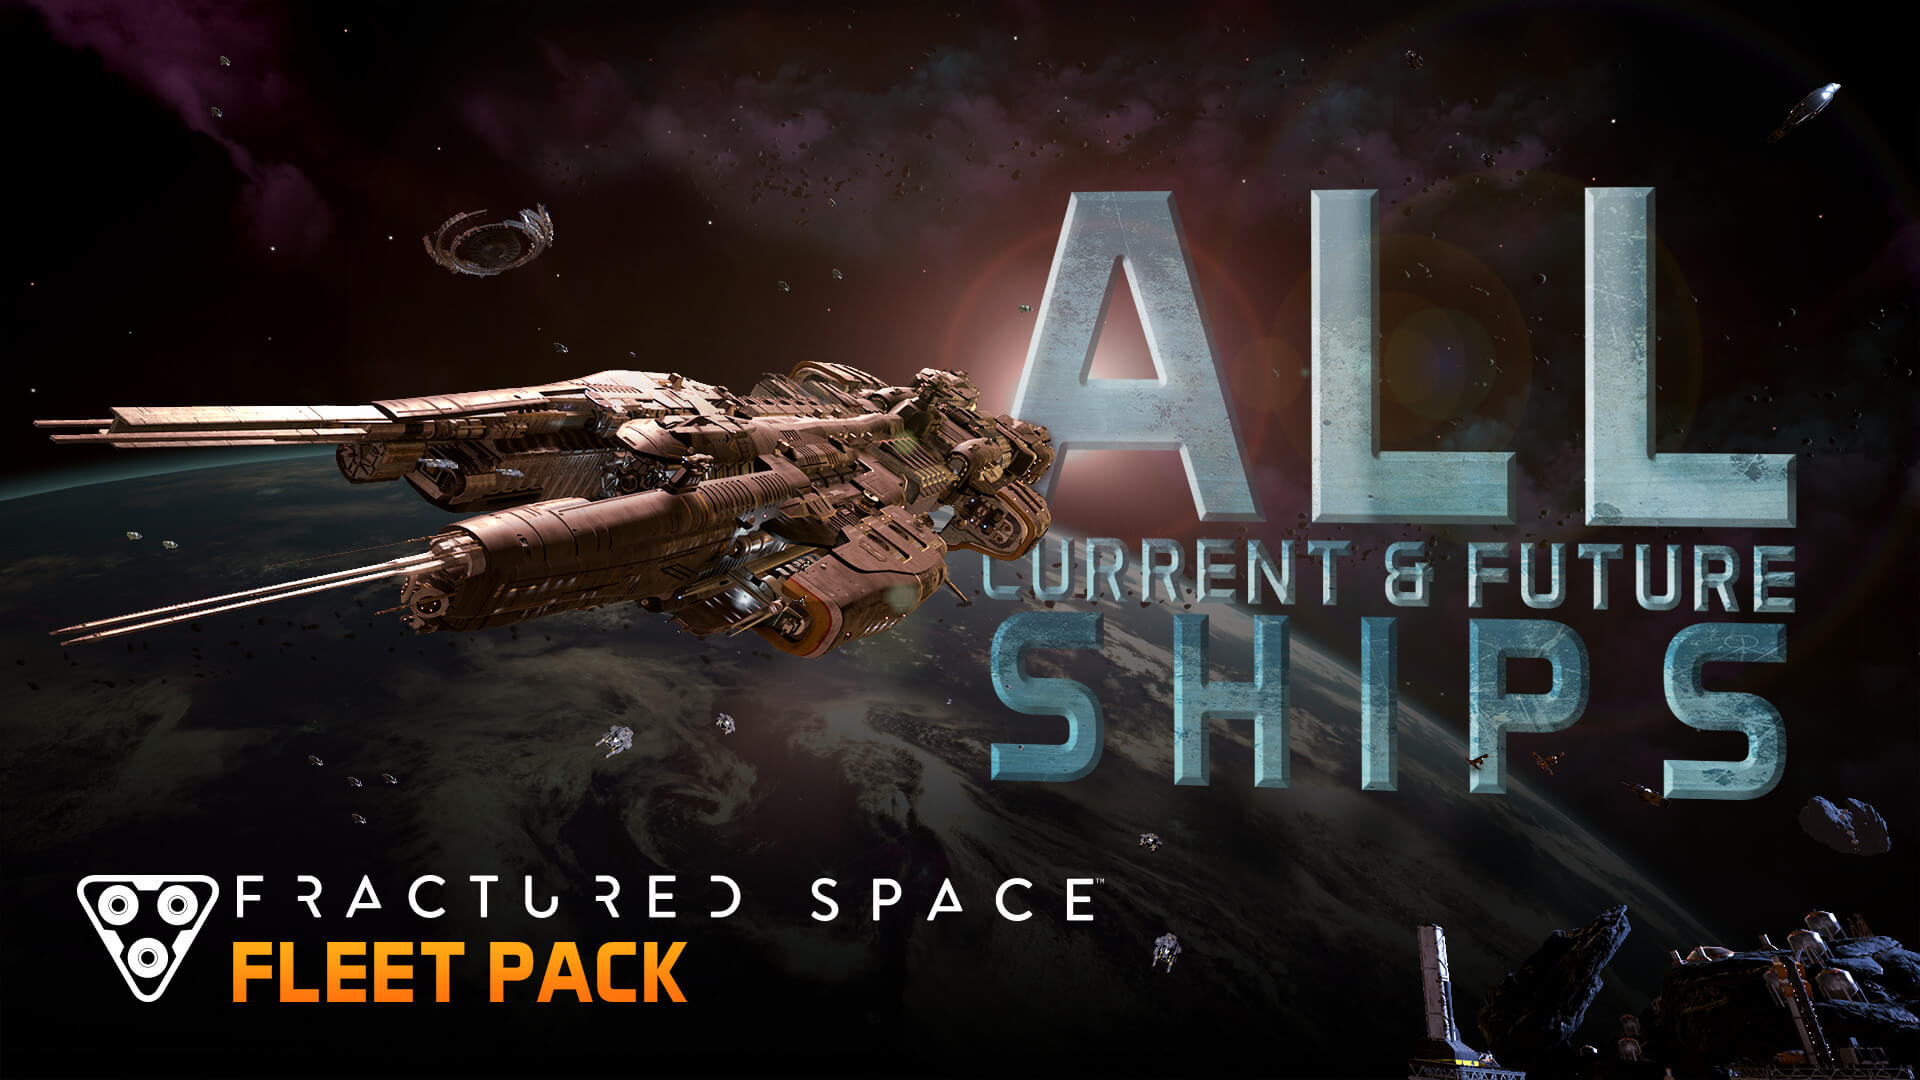 Fractured Space - Fleet Pack: All Current and Future Ships - Dodatek (PC) DIGITAL